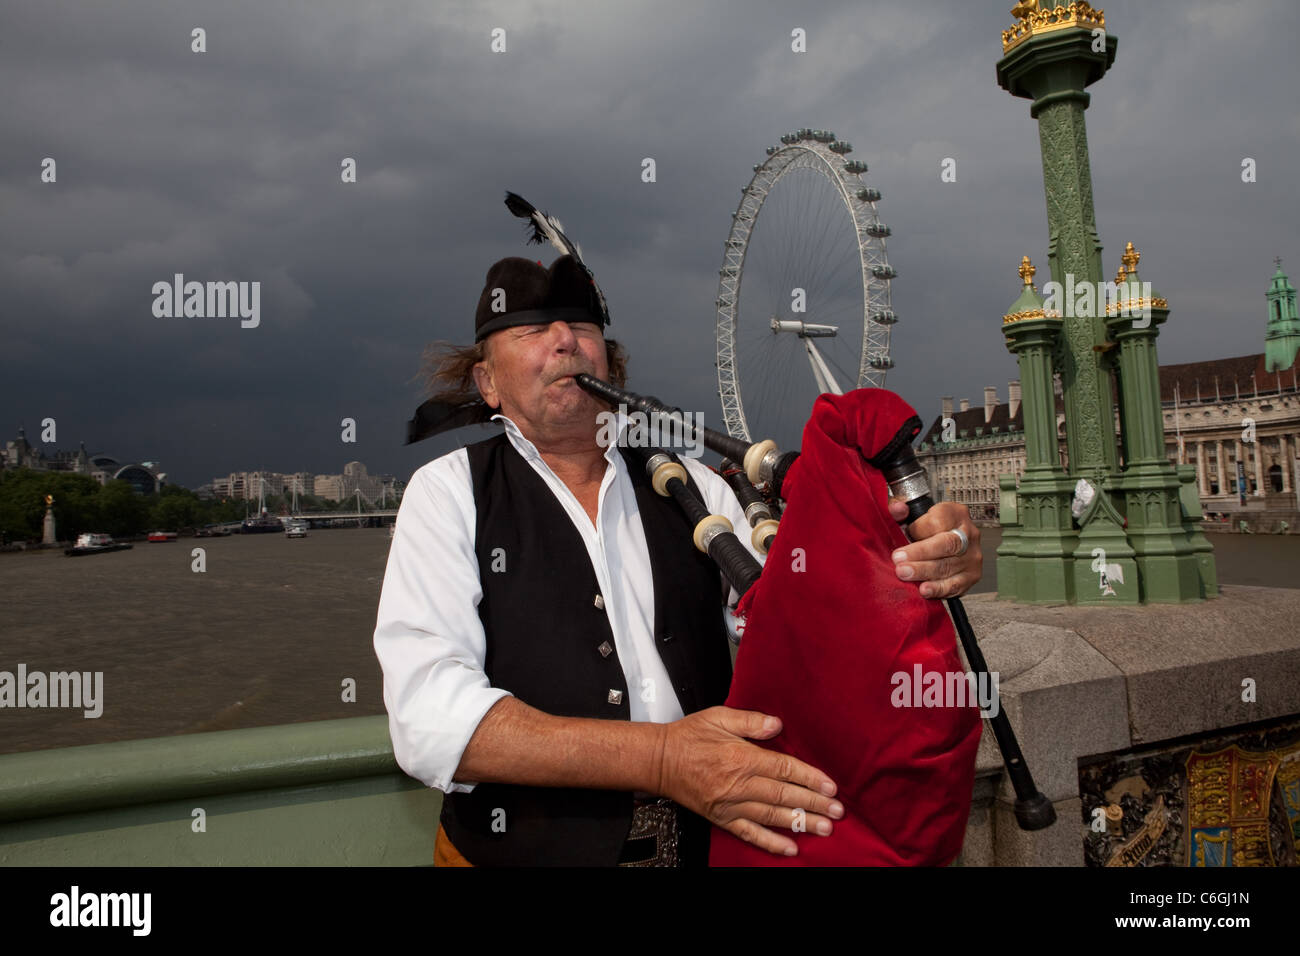 A man plays the bagpipes on Westminster Bridge, the London Eye is visible in the background. Stock Photo